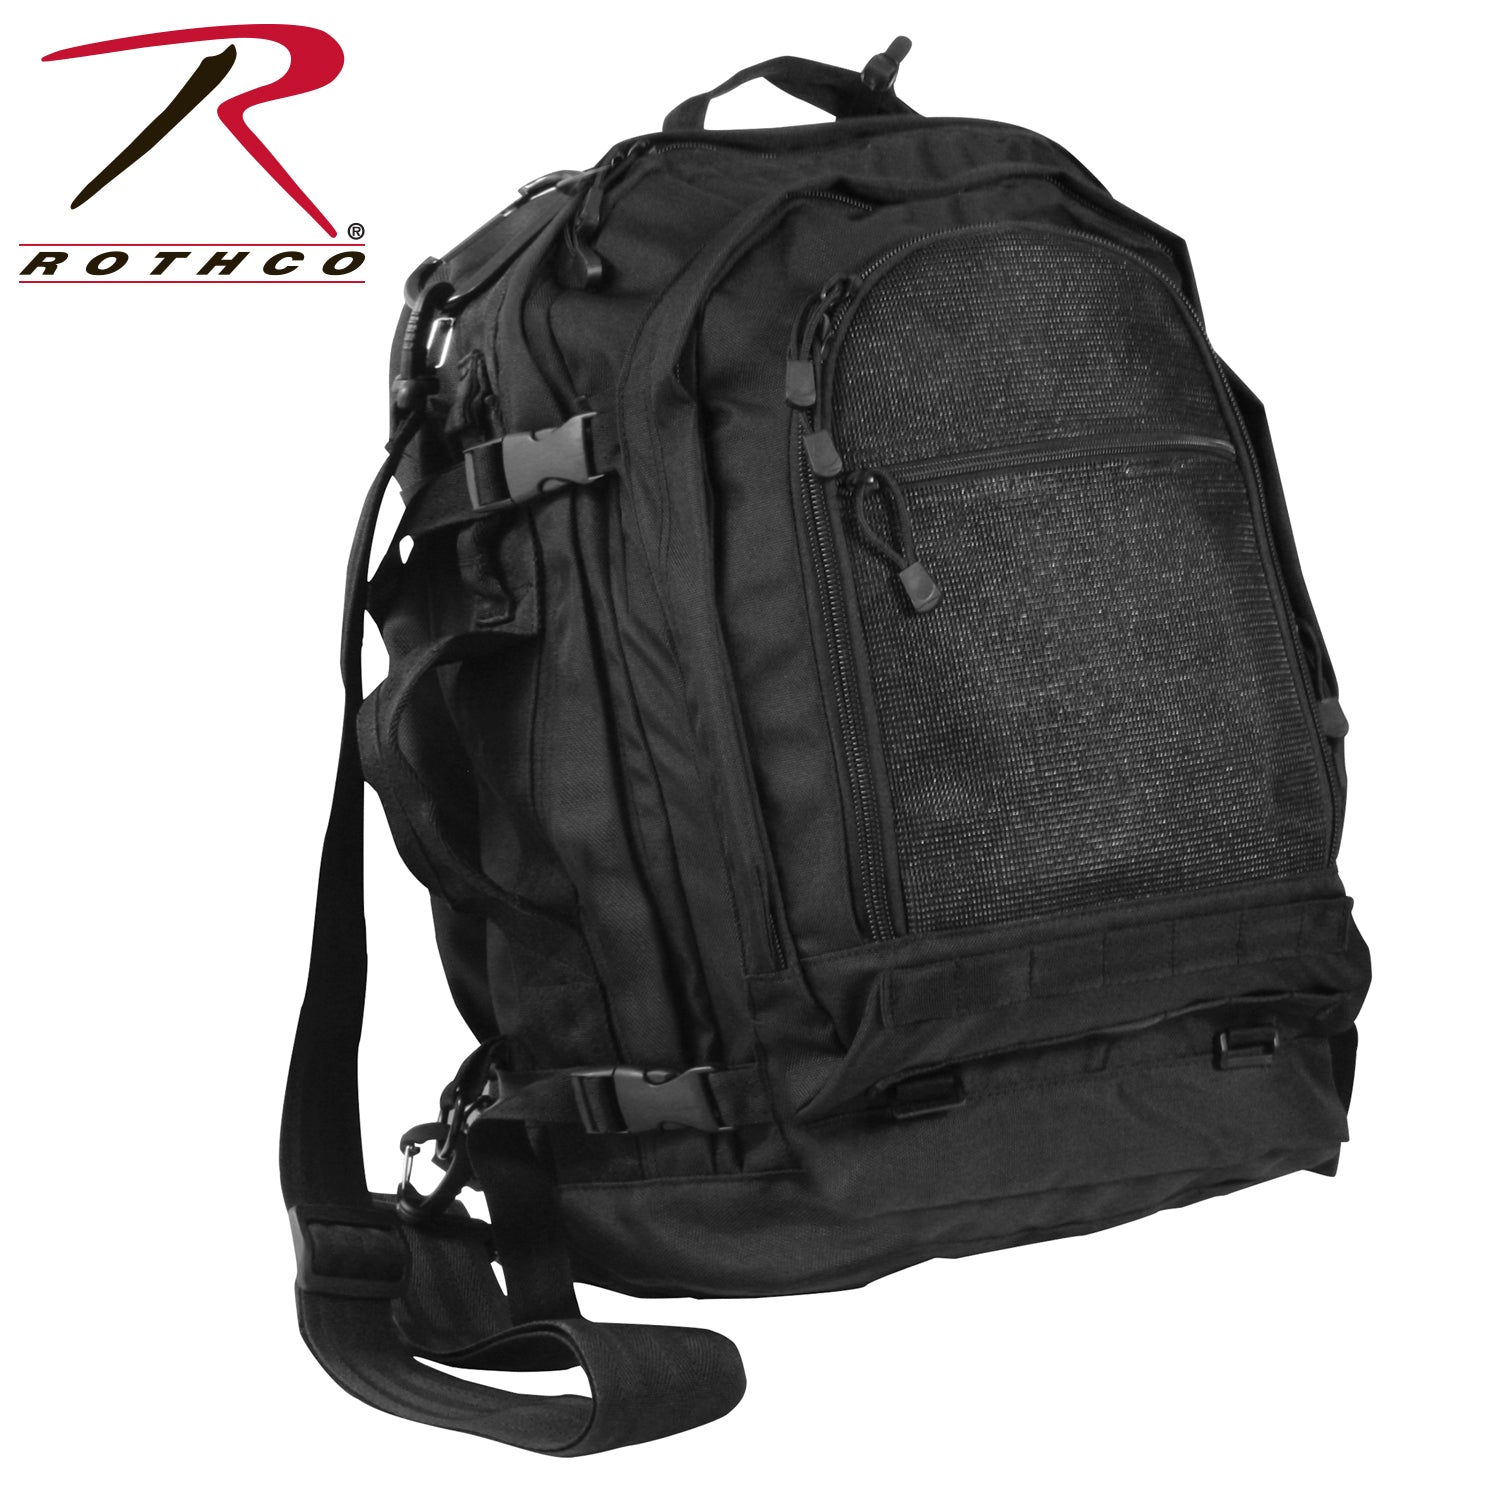 Milspec Move Out Tactical Travel Backpack Backpacks & Packs MilTac Tactical Military Outdoor Gear Australia